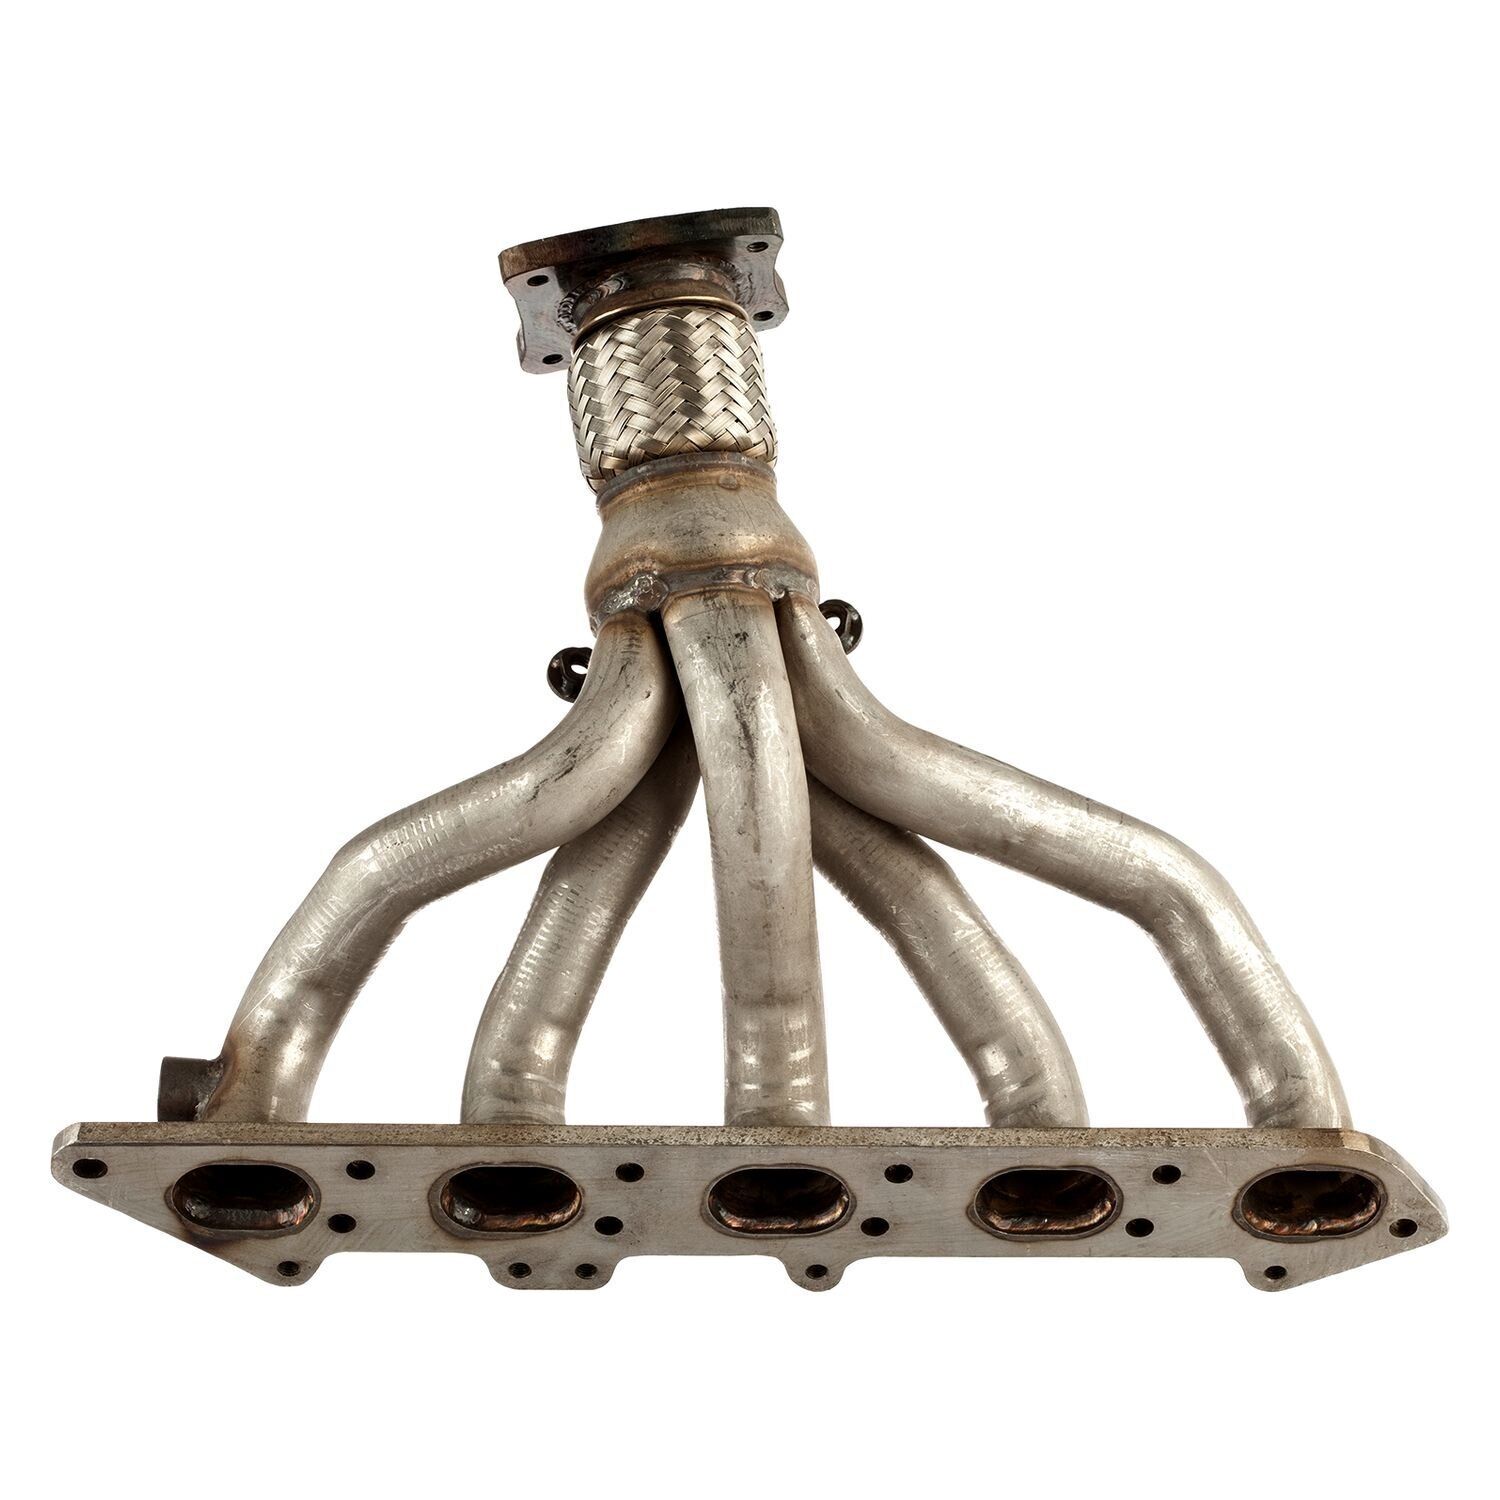 For Volvo V70 1999-2003 ATP 101300 Stainless Steel Natural Exhaust Manifold